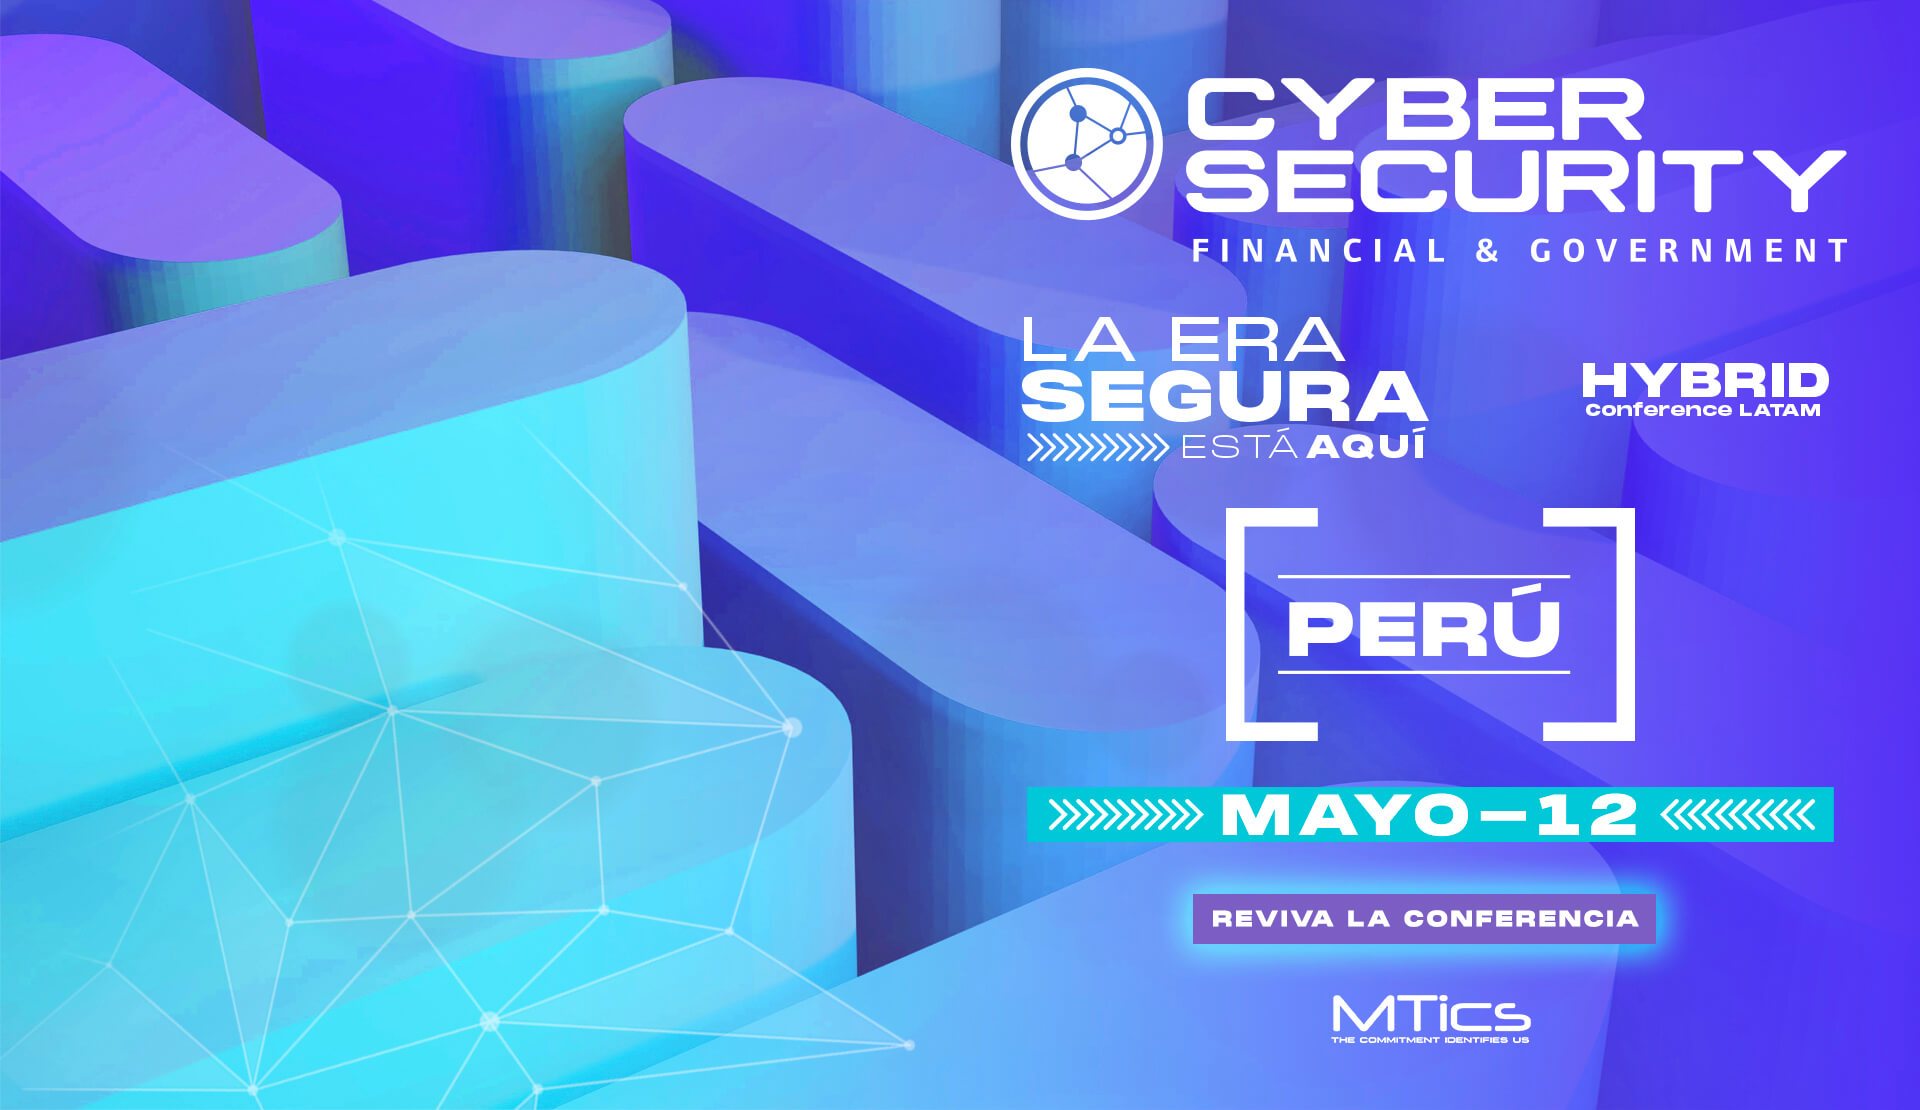 Cybersecurity Financial & Government 2022 Perú